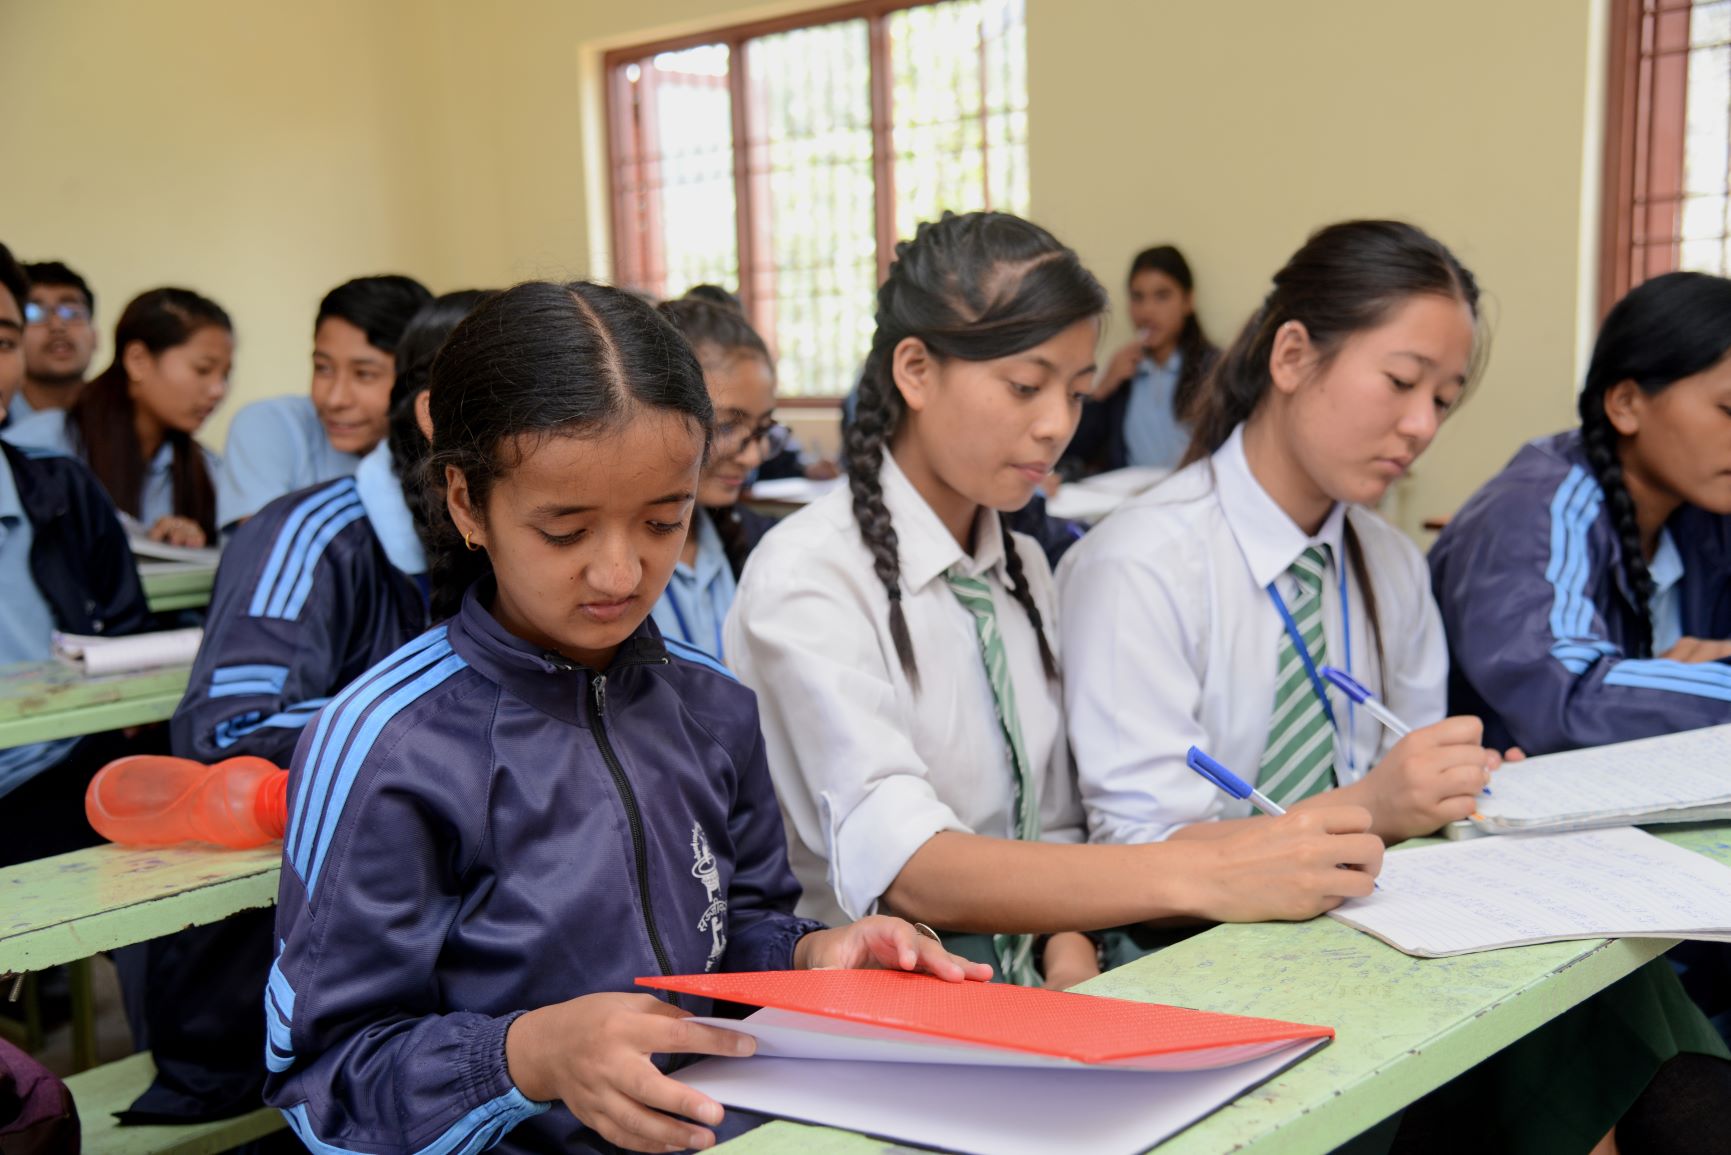 students in a classroom opening their notebooks